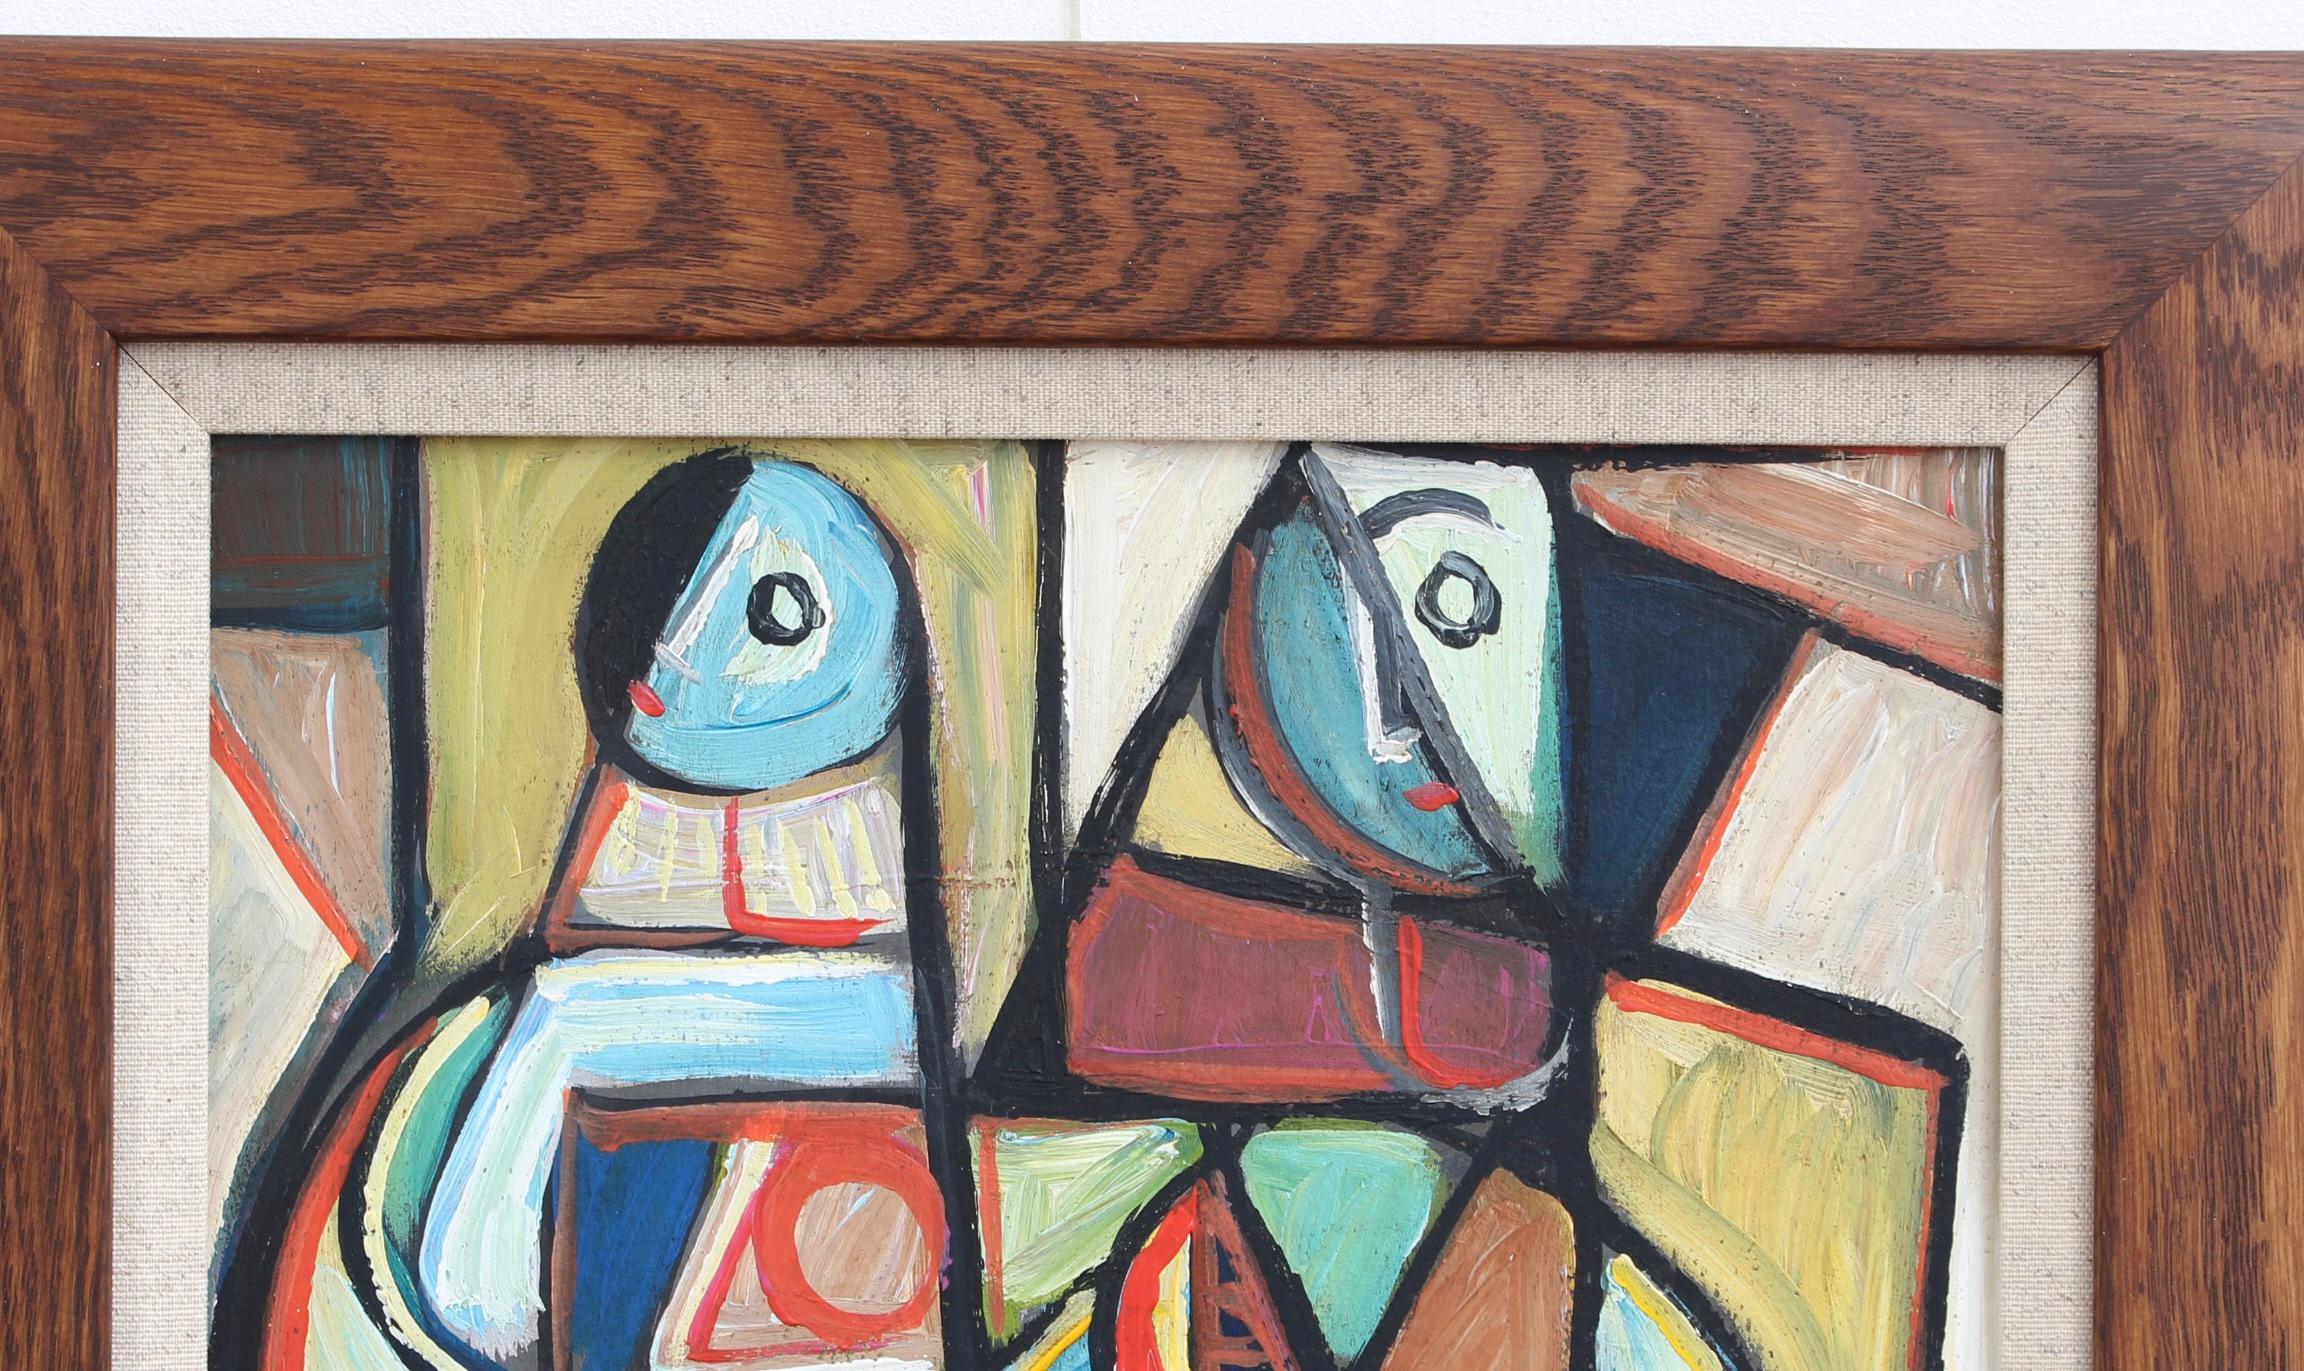 'Together', oil on board, Berlin School (circa 1960s). A vibrant, mid-century artwork in a distinctive and compelling style. Clearly inspired by cubists Picasso and Braque, the artist uses angles, lines and subdued earth tones to create this